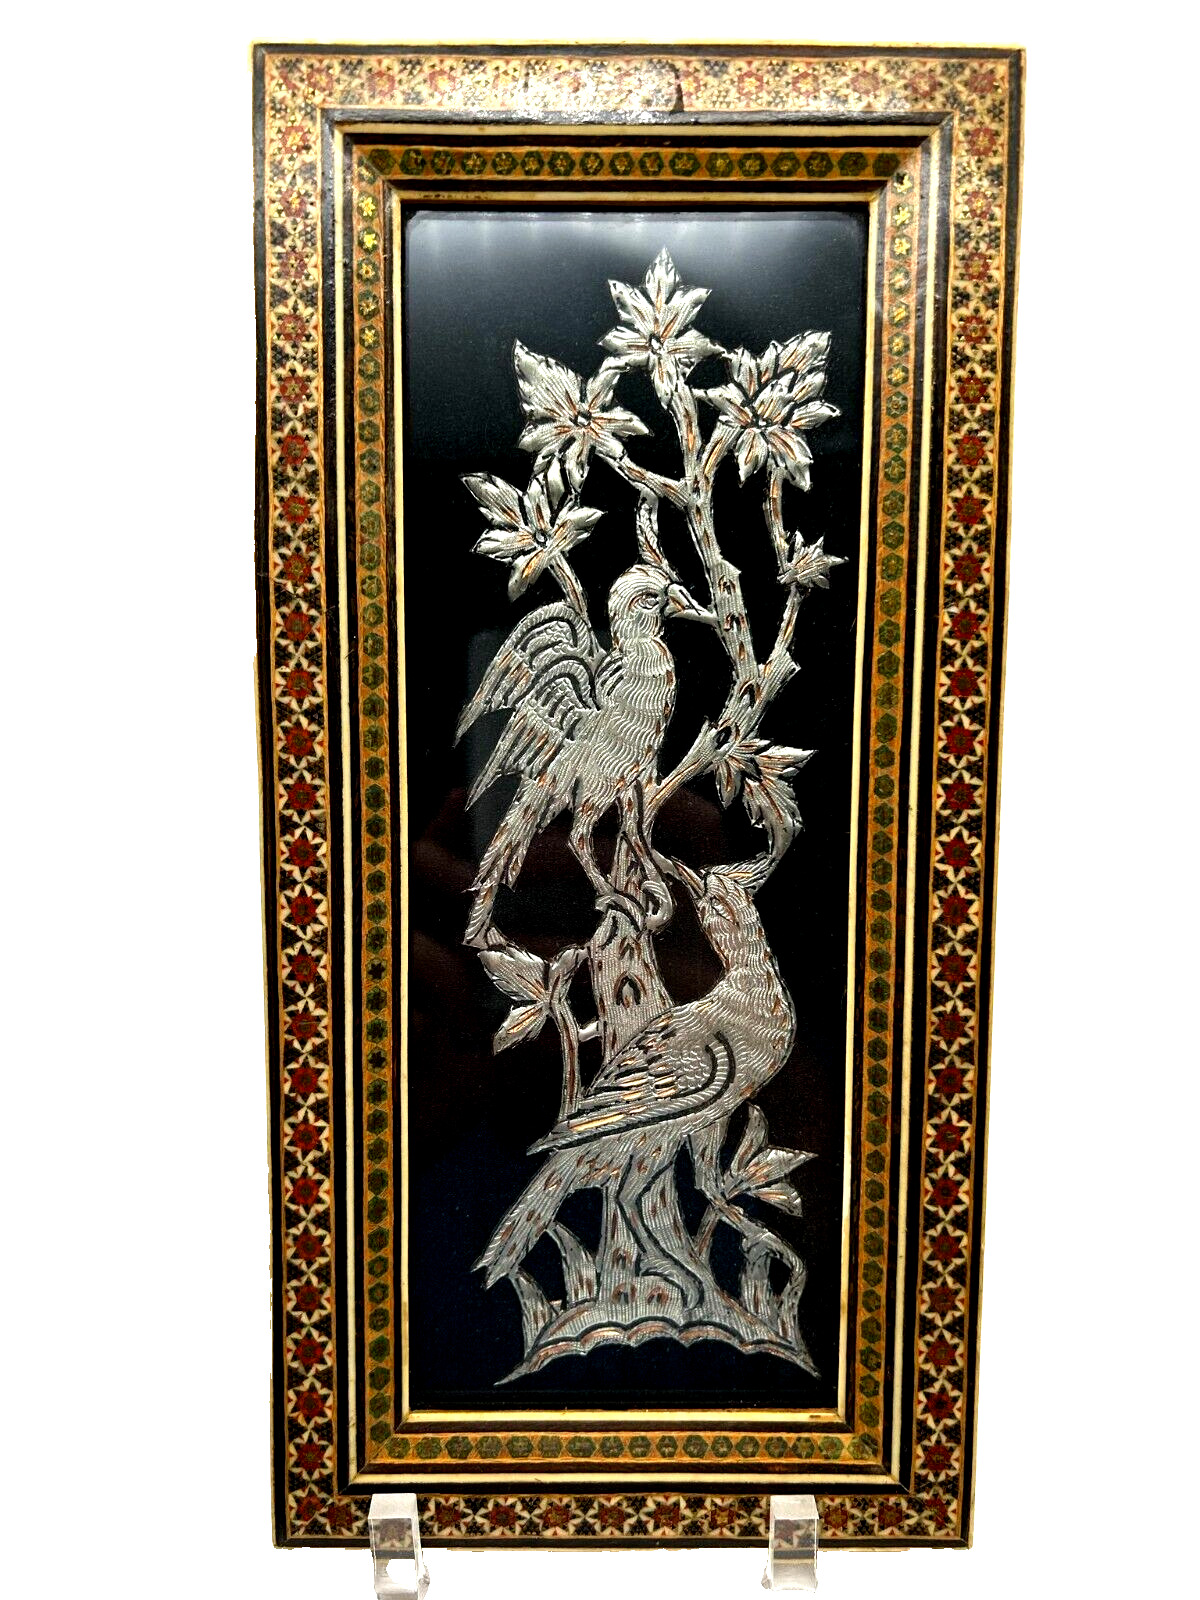 Vintage Middle Eastern Khatam Marquetry Frame Etched Copper Birds Trees Wall Art